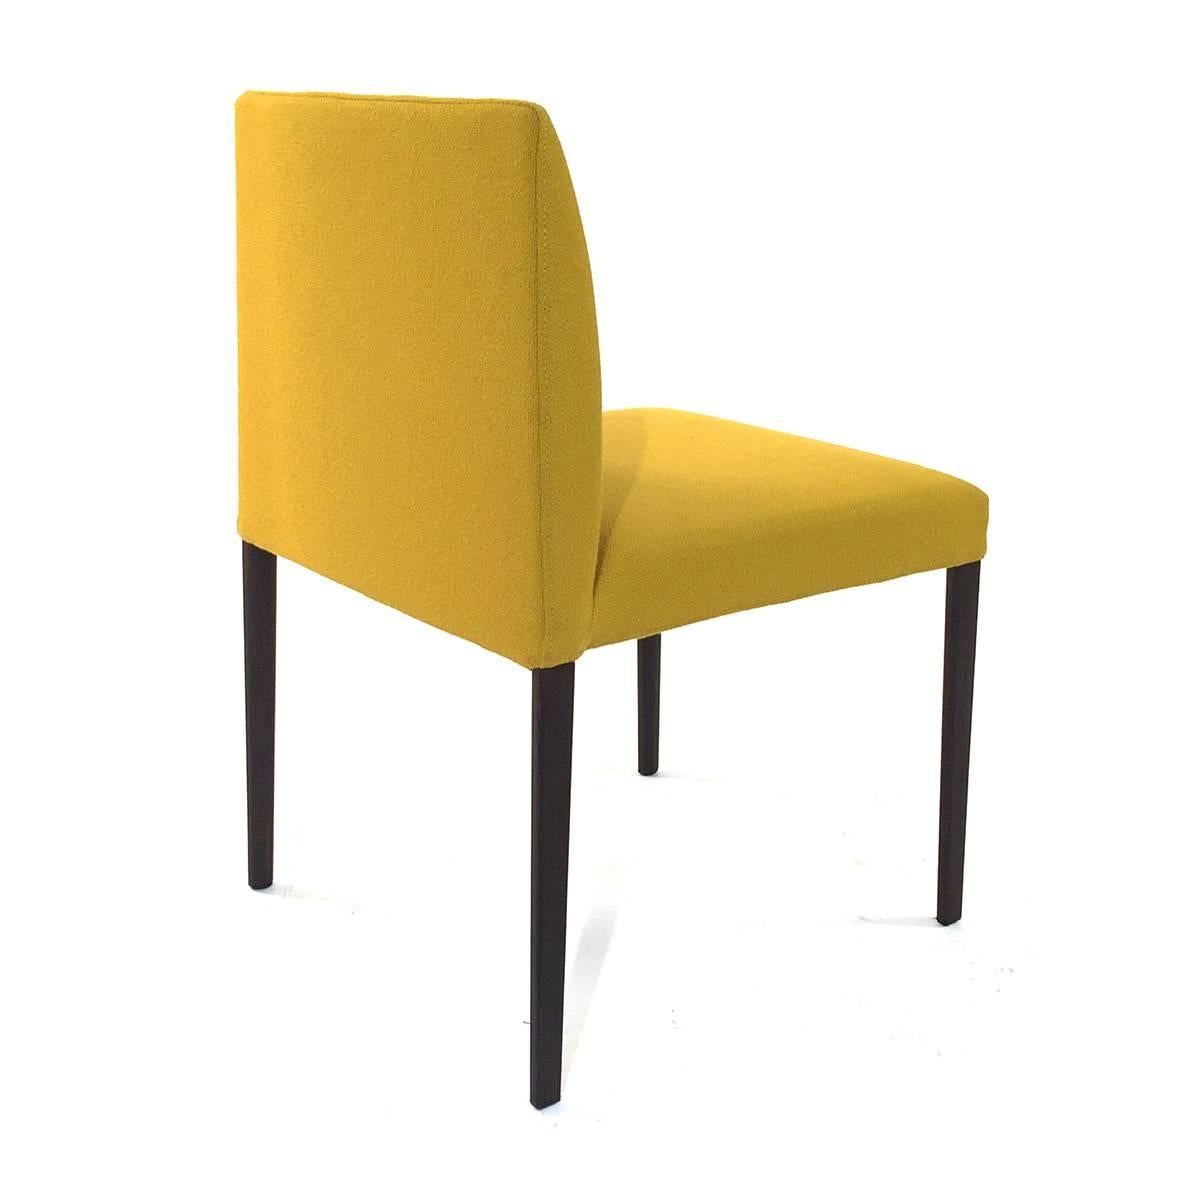 Italian Yellow Saari Side Chair, Lievore Altherr Molina for Arper, Modern Dining, Italy  For Sale